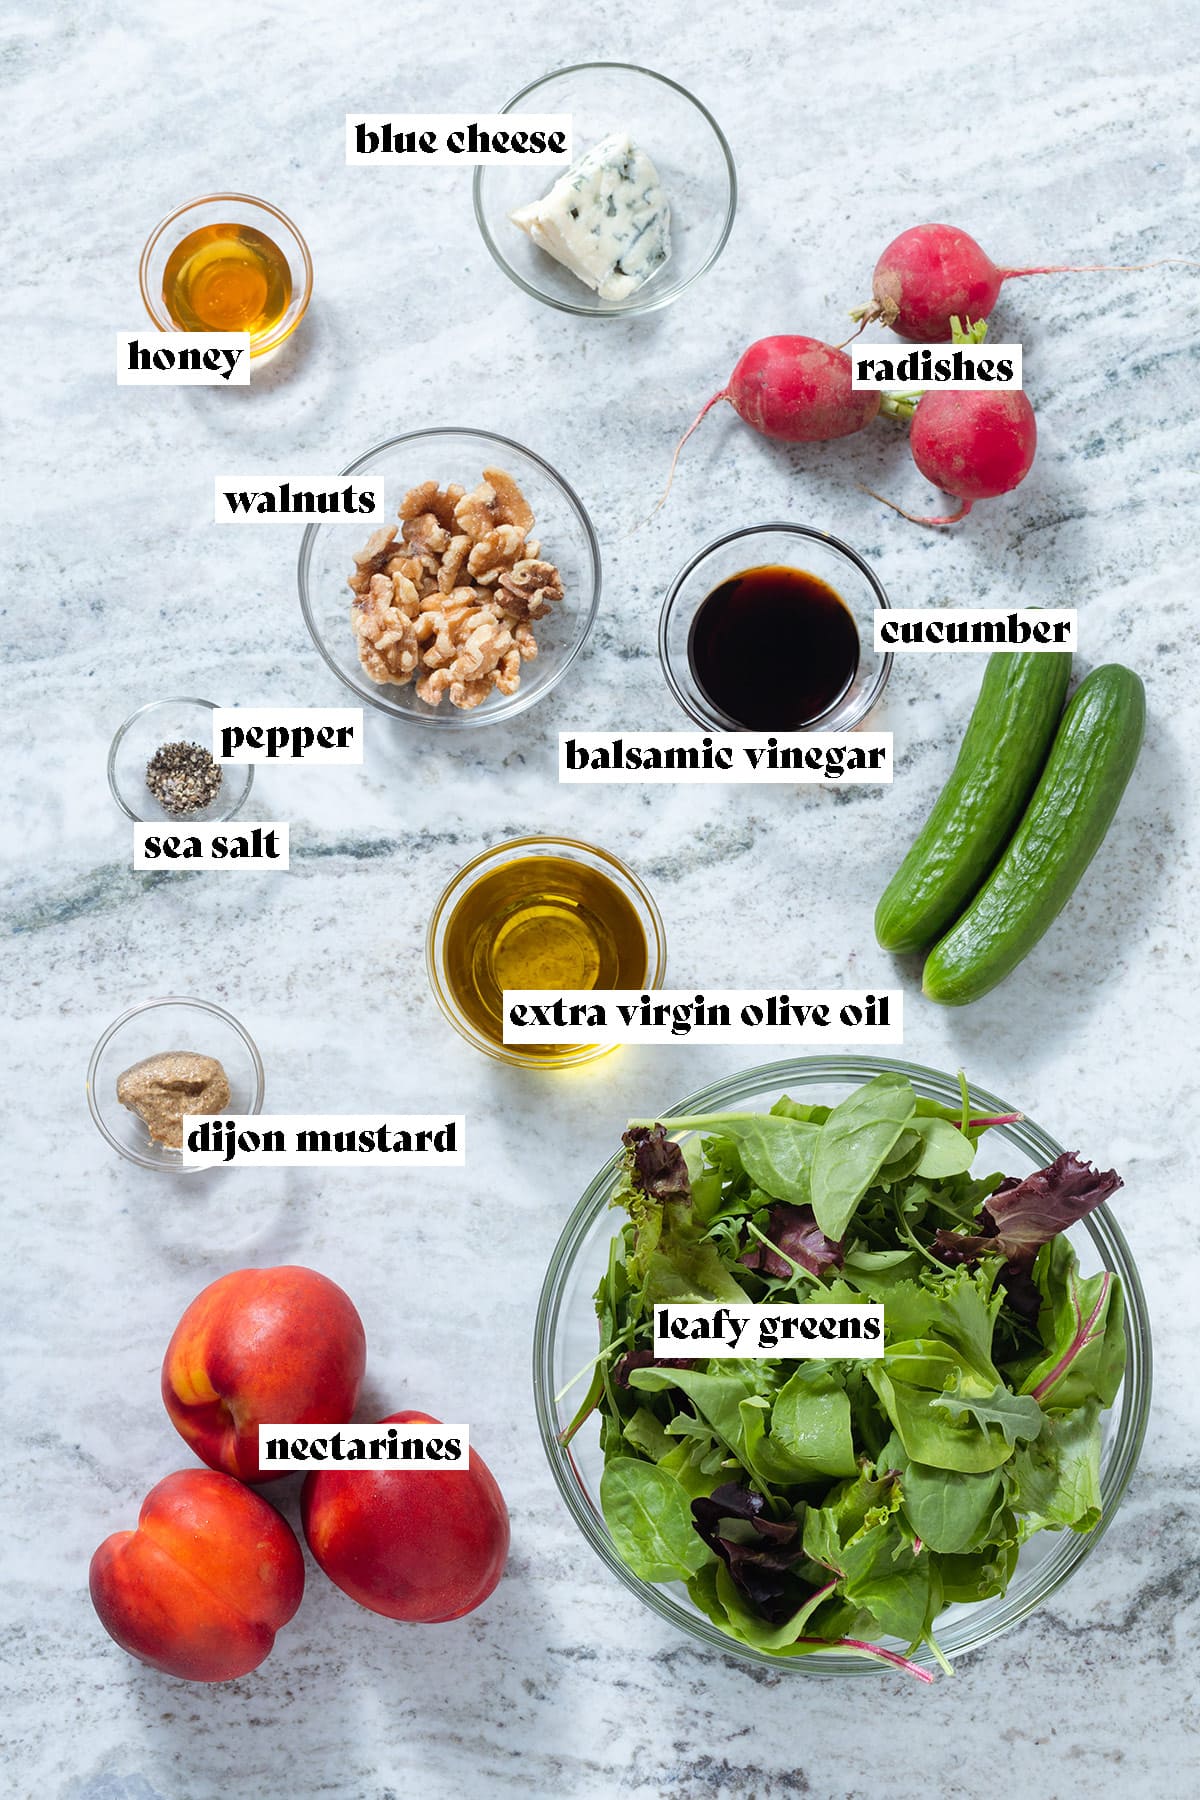 Ingredients like nectarines, mixed greens, cucumbers, radishes, and condiments in glass bowls laid out on a grey stone background with text overlay.